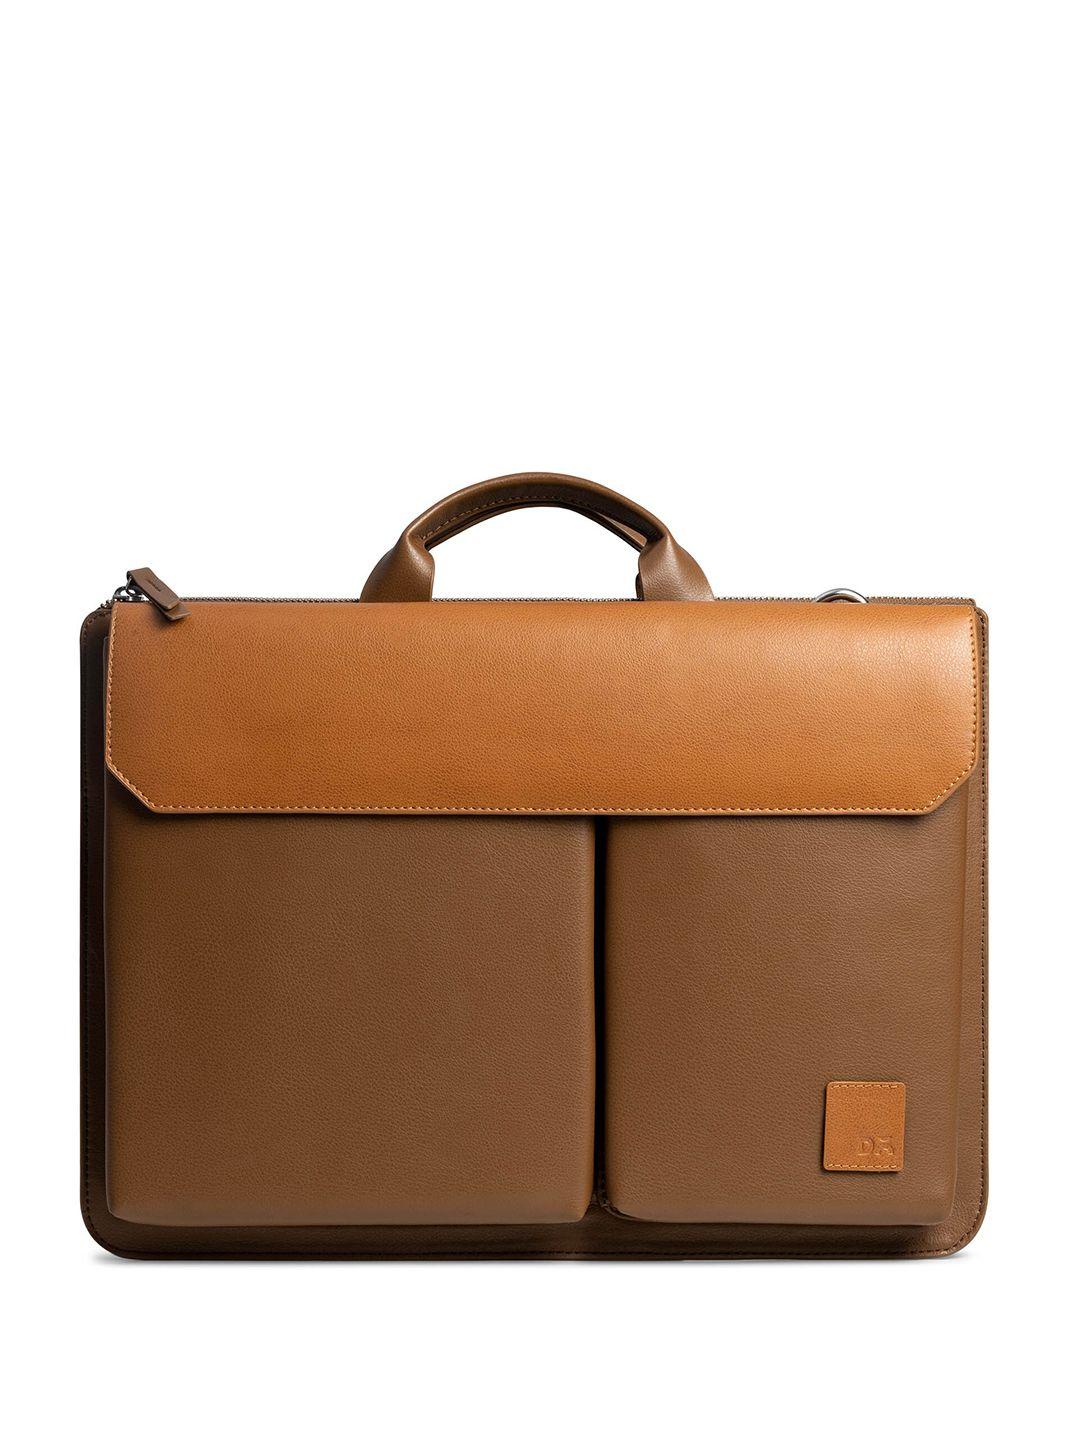 dailyobjects unisex laptop bag- up to 16 "